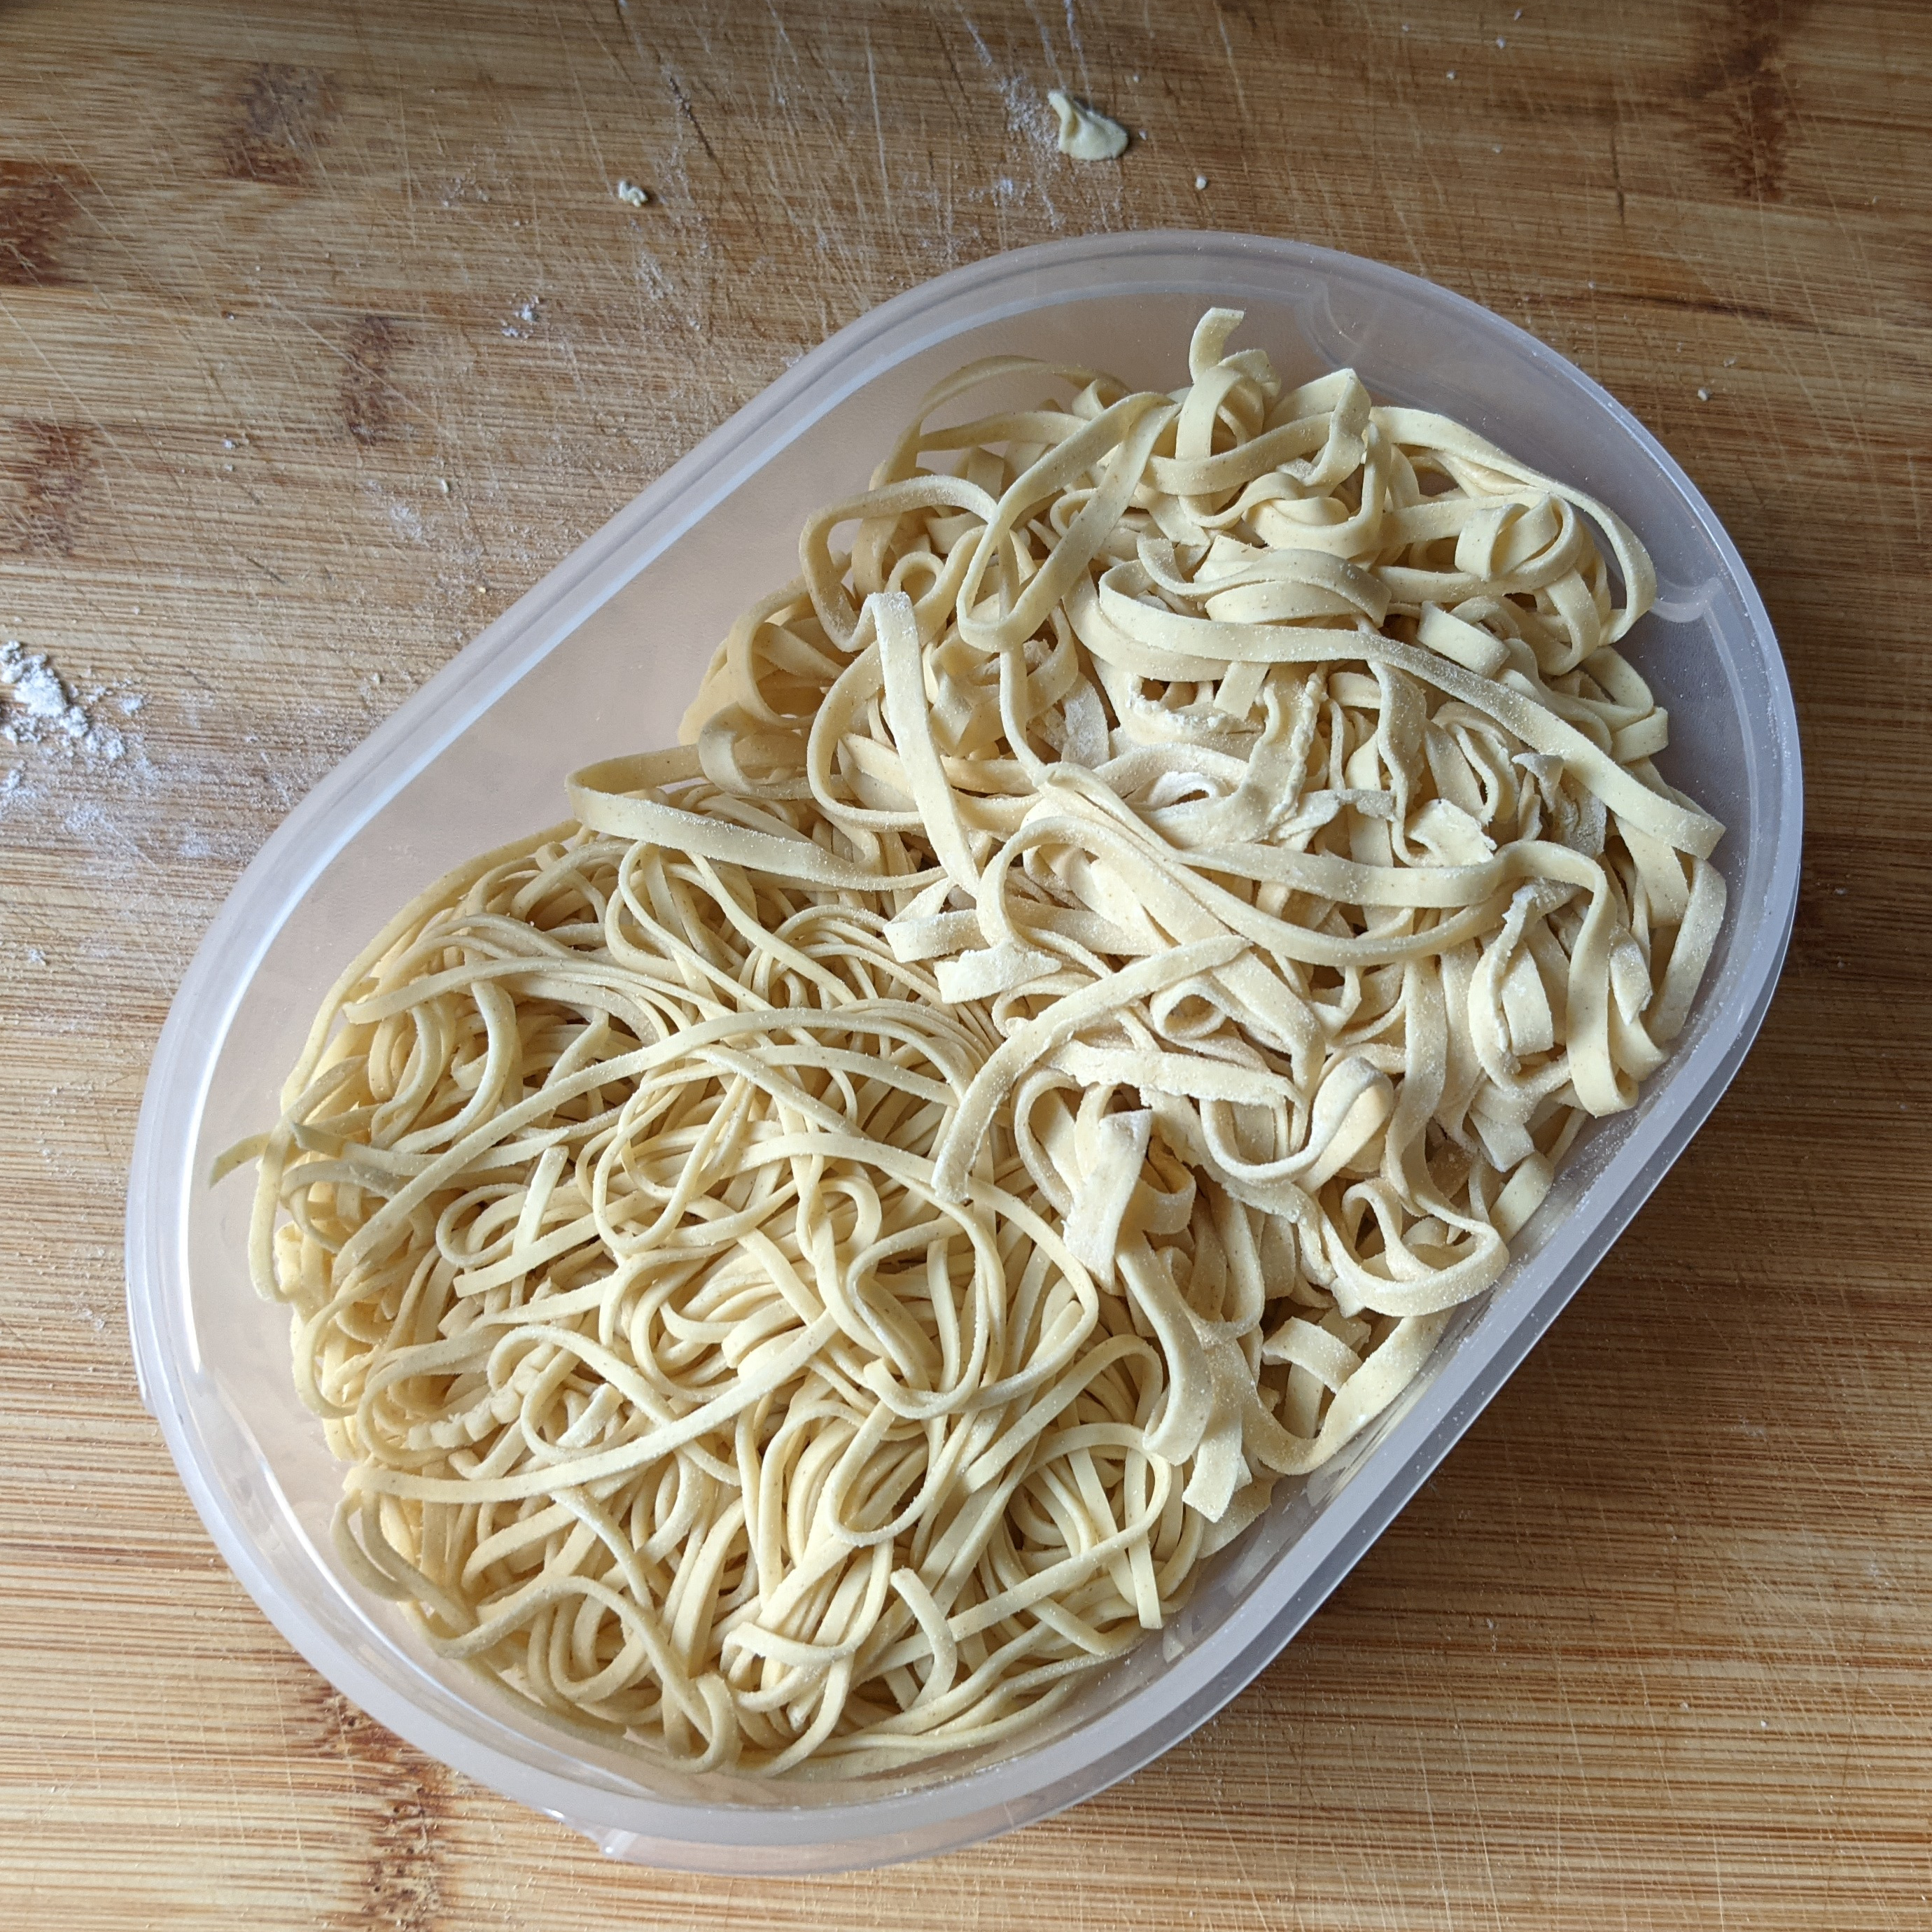 Final product: noodles in a tupperware container